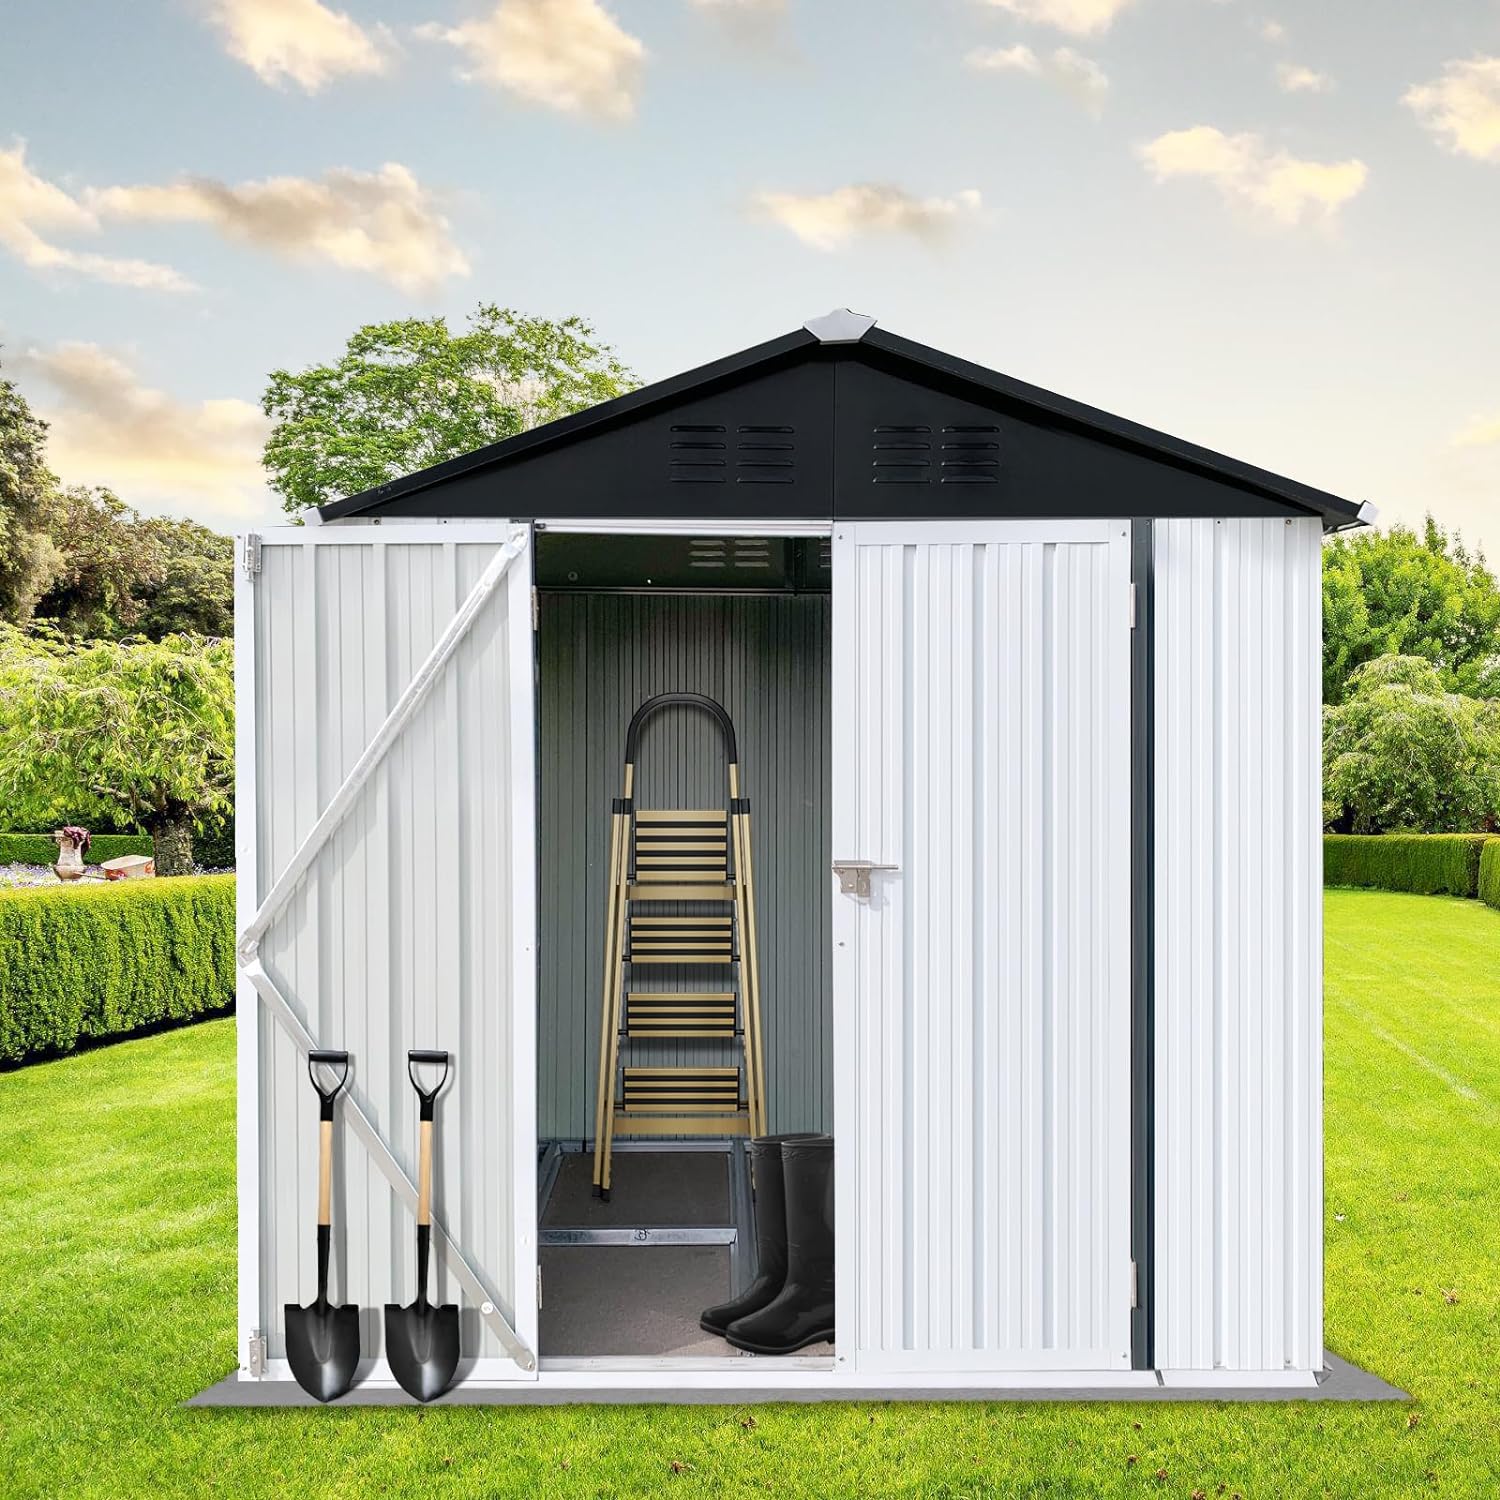 zevemomo outdoor storage shed review